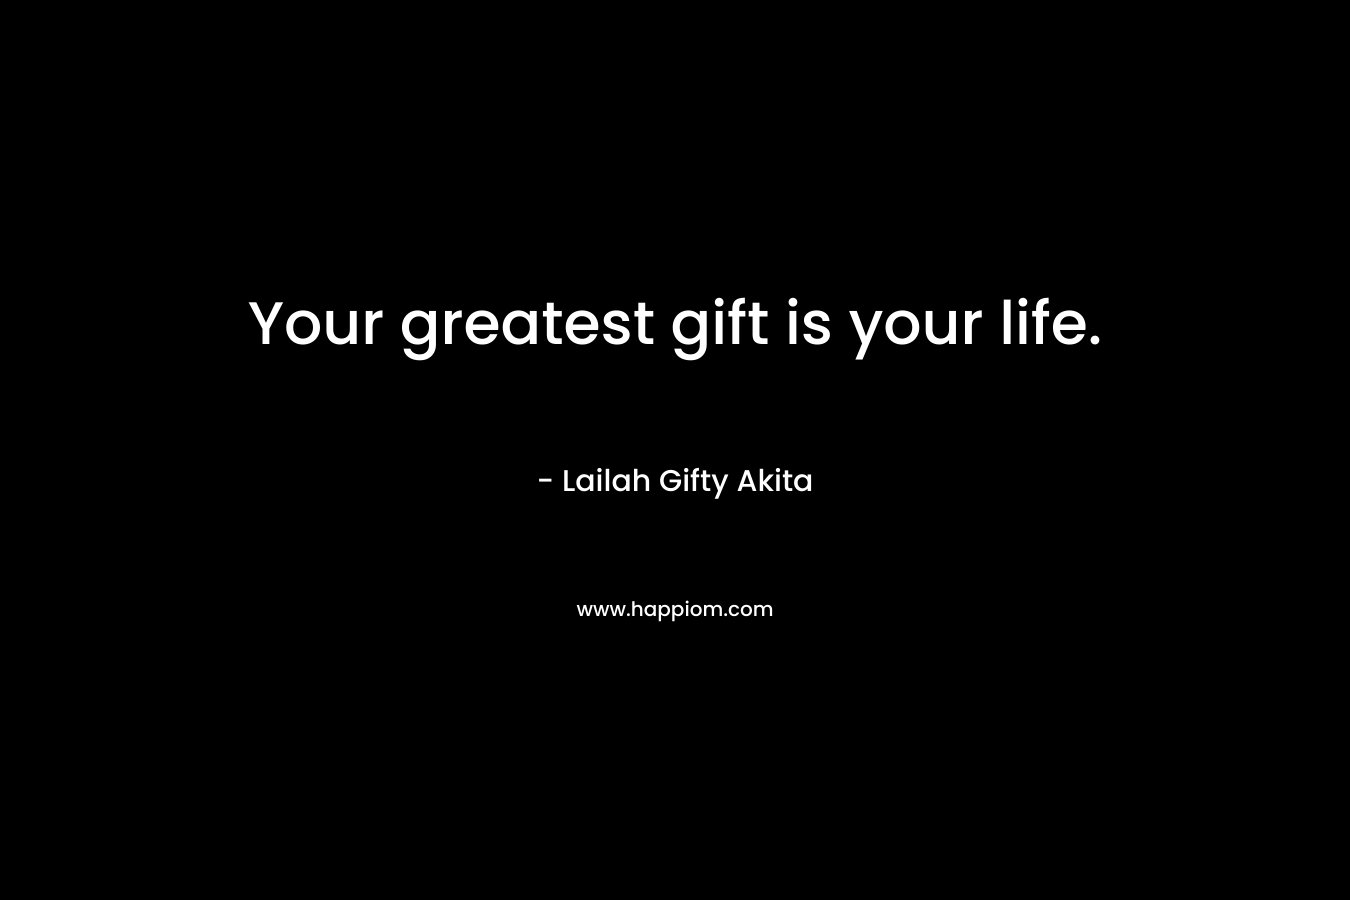 Your greatest gift is your life.